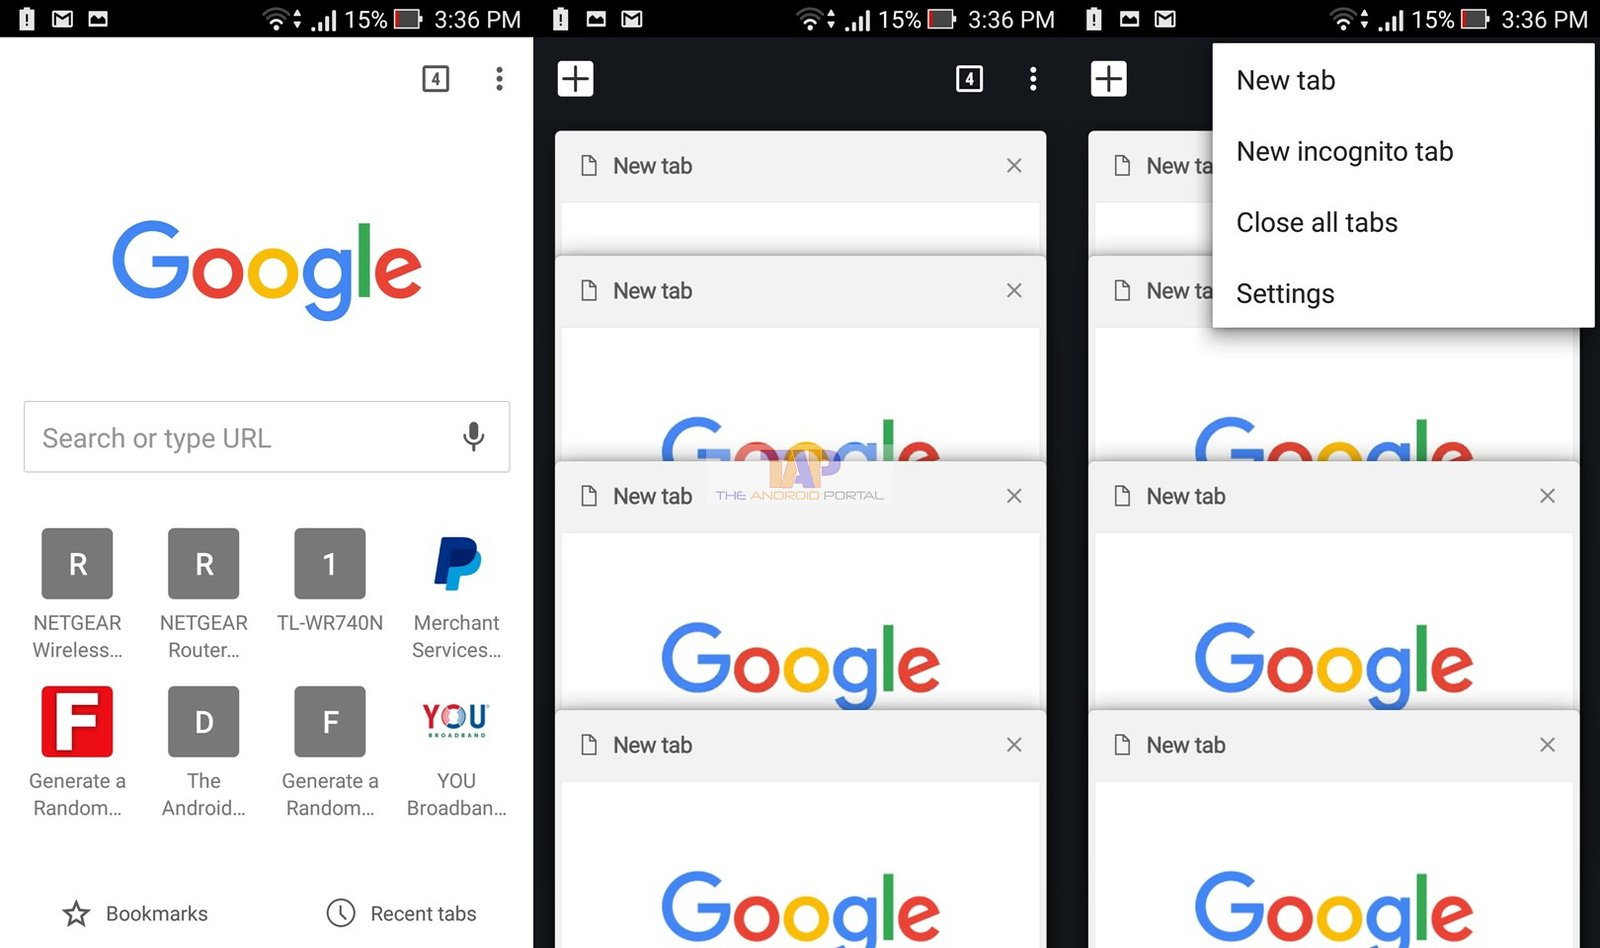 How to Close All Tabs on Chrome Beta Browser on Smartphone